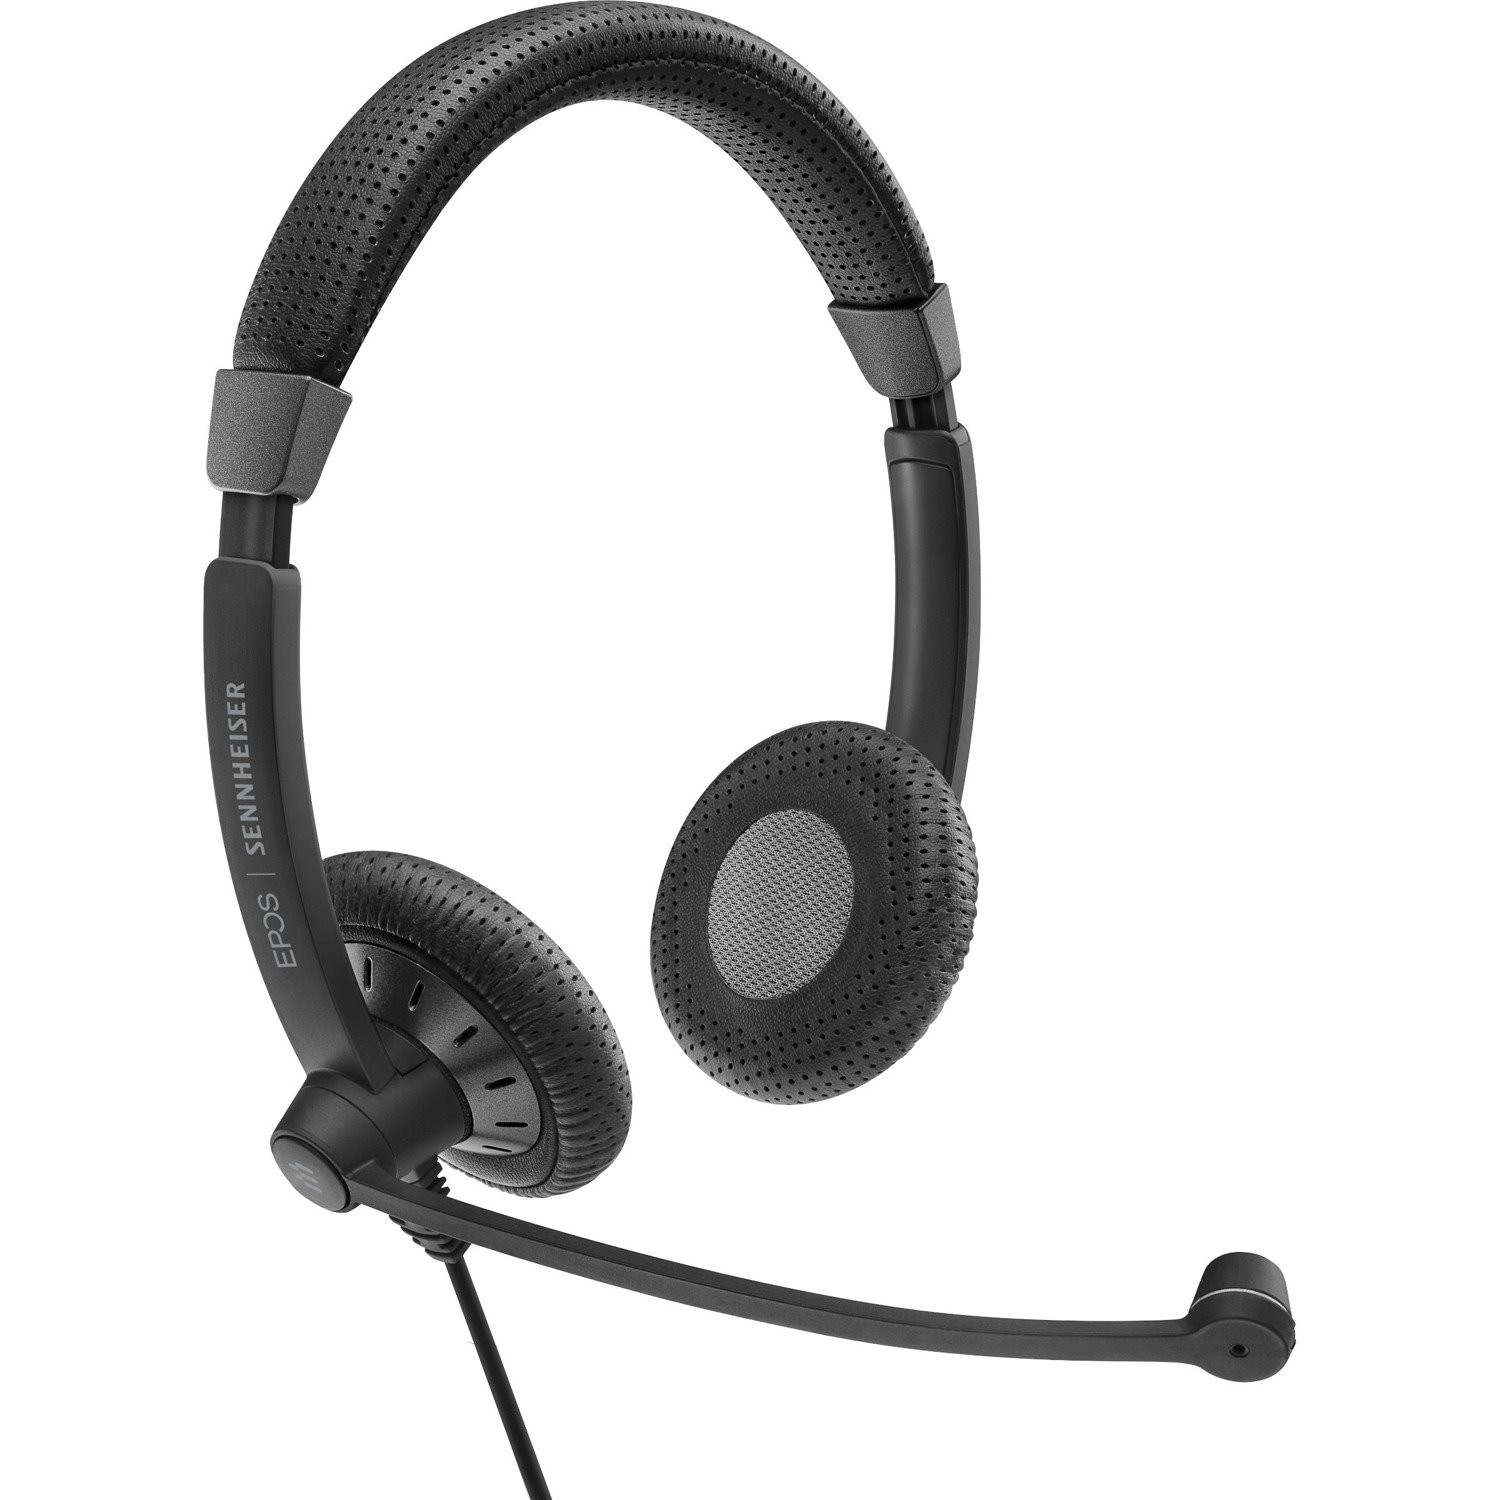 EPOS IMPACT SC 75 USB MS Wired On-ear Stereo Headset - Black